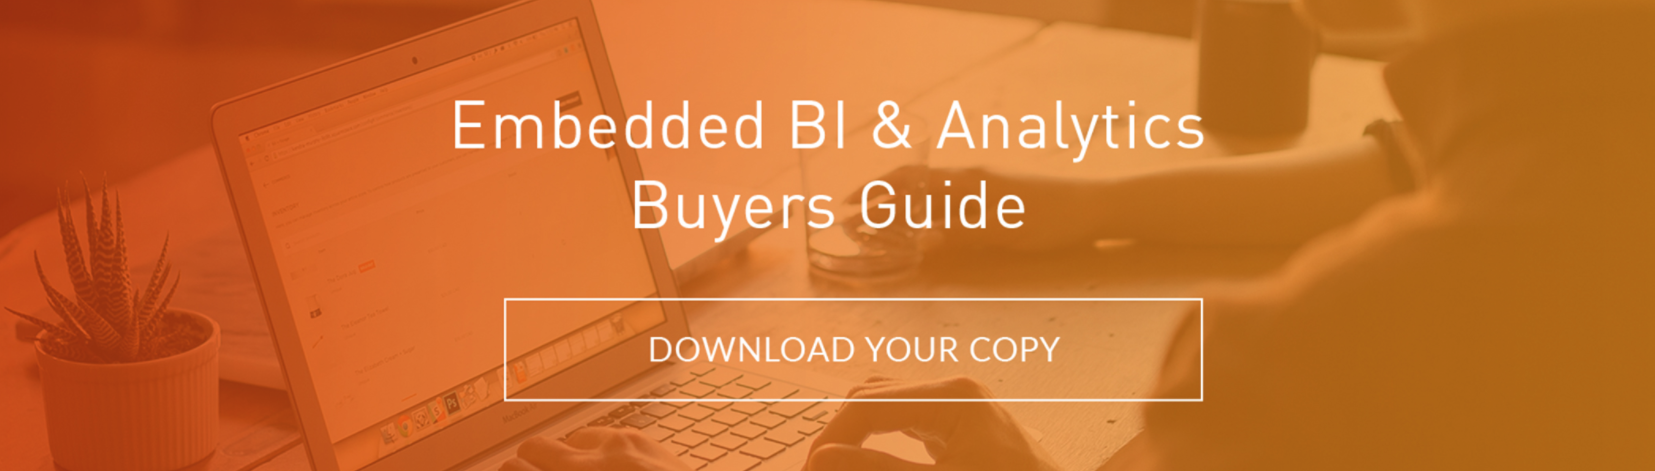 Download your copy of the embedded BI and analytics buyers guide